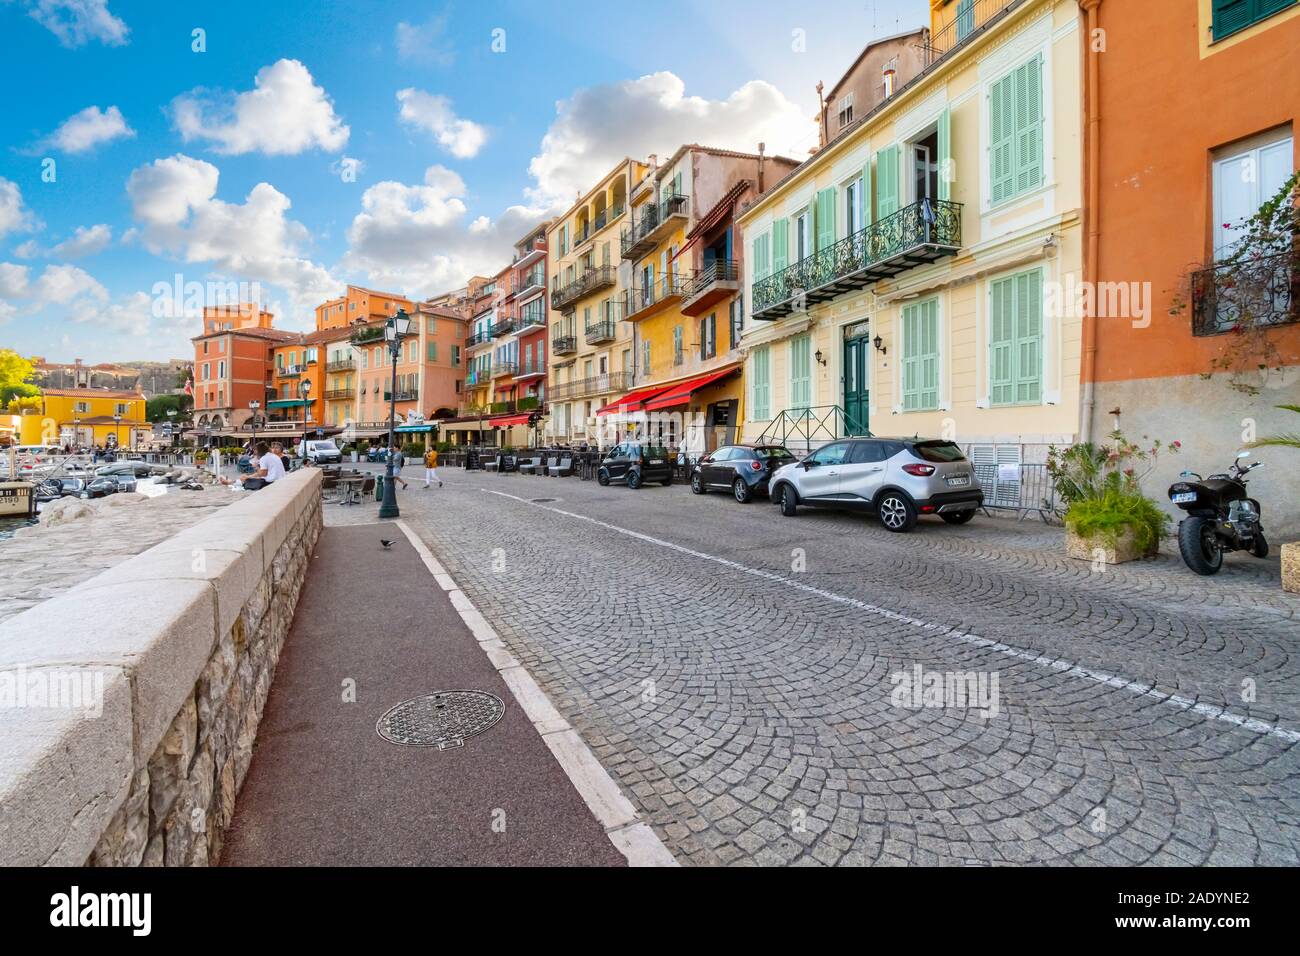 Tourists walk a cobbled street in front of a row of colorful apartments and cafes in Villefranche Sur Mer, on the Mediterranean Coast of France Stock Photo